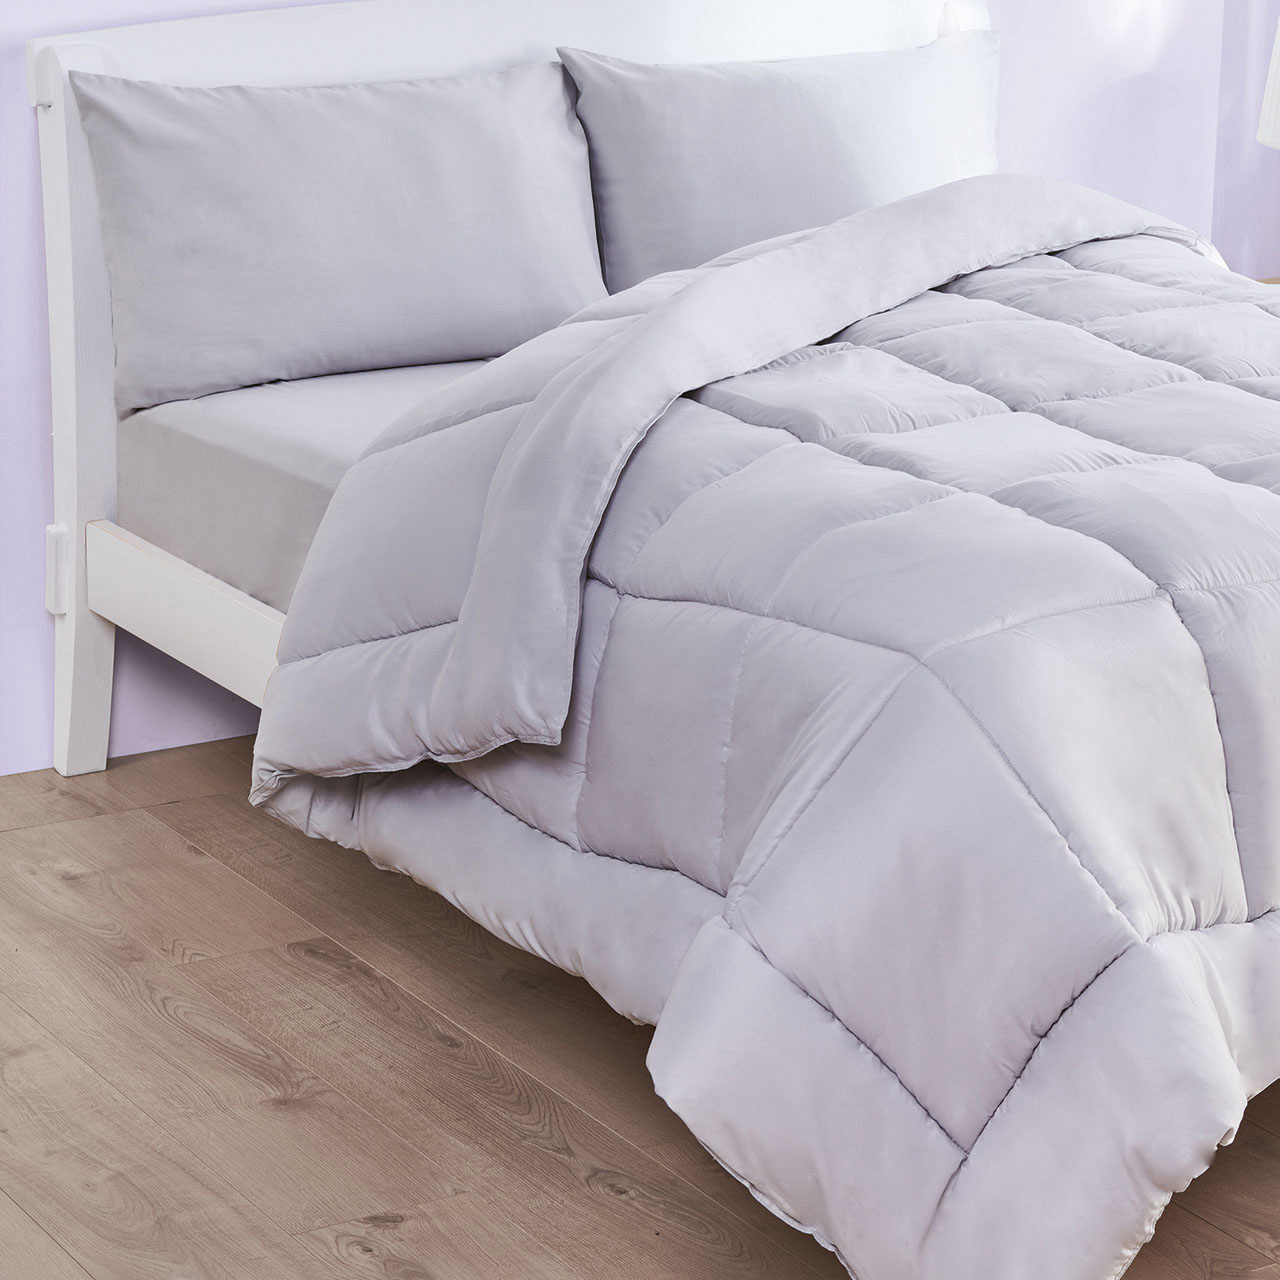 All-in-One Coverless Duvet and Bedding Bundle - 4.5 Tog